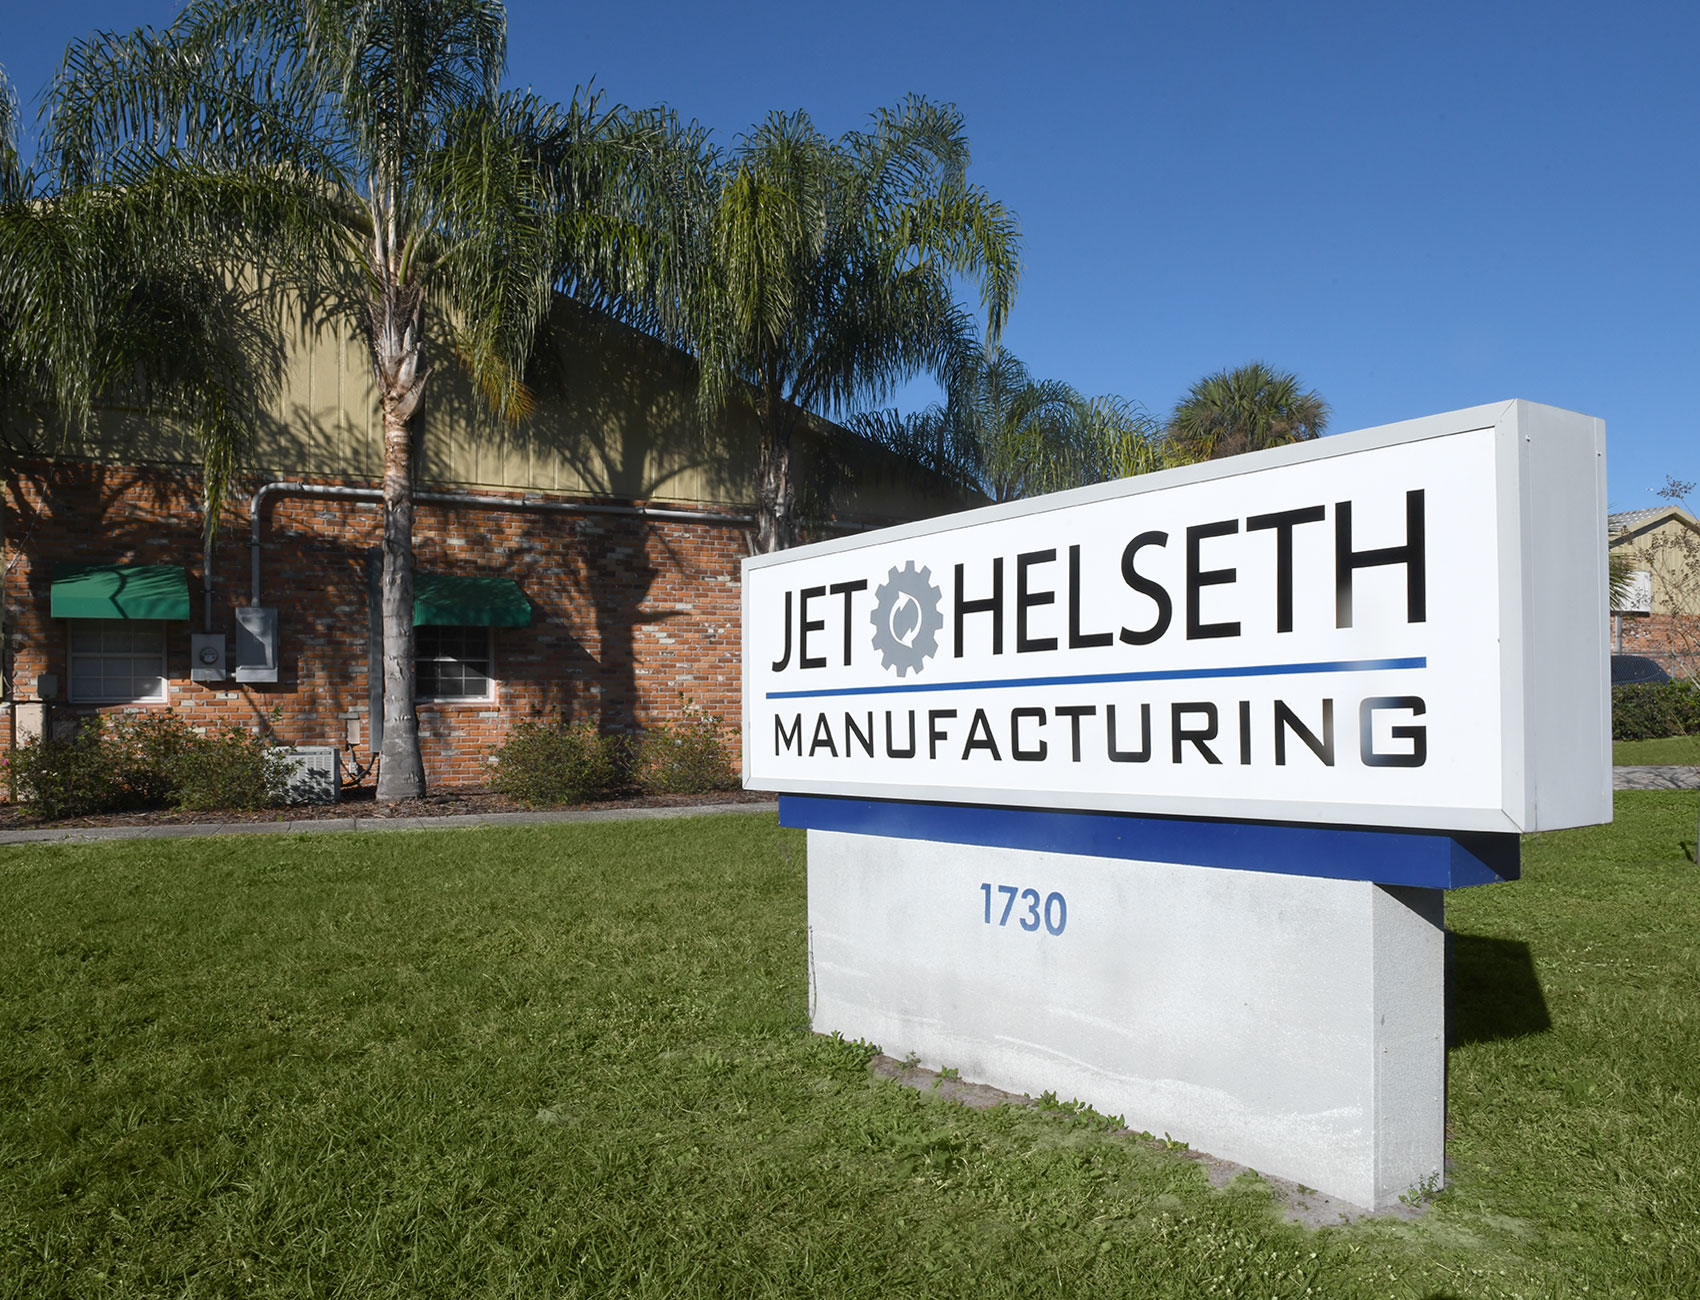 Best CNC Machining and Manufacturing - Jet Helseth Manufacturing